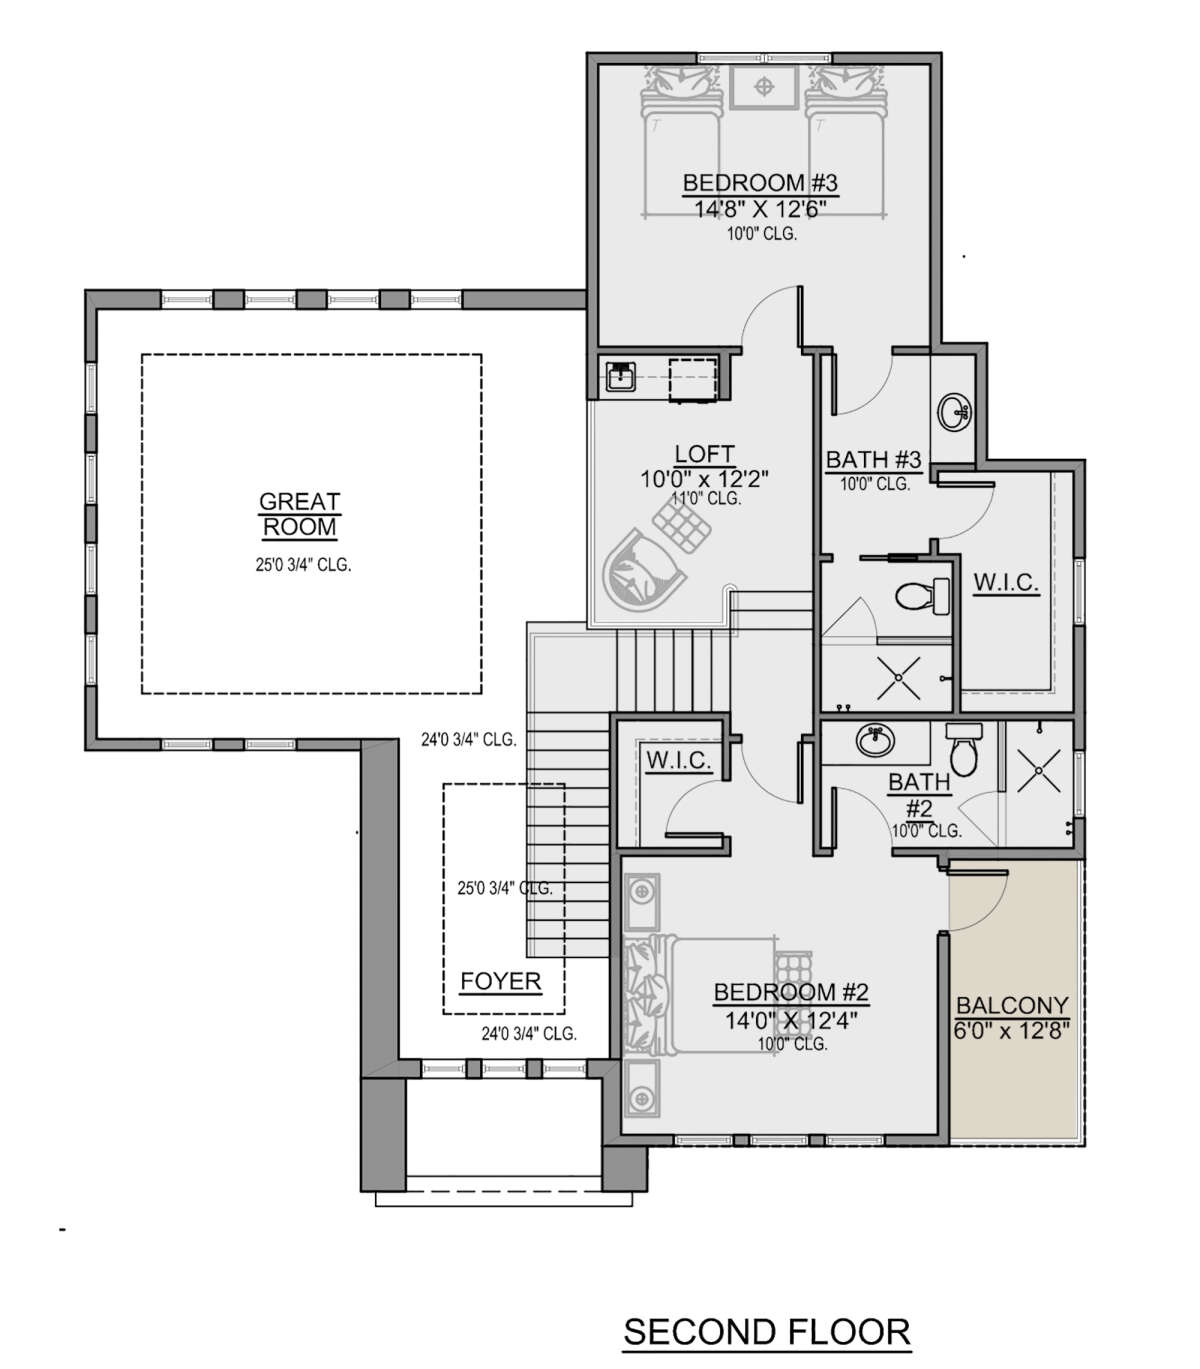 Second Floor for House Plan #5565-00068